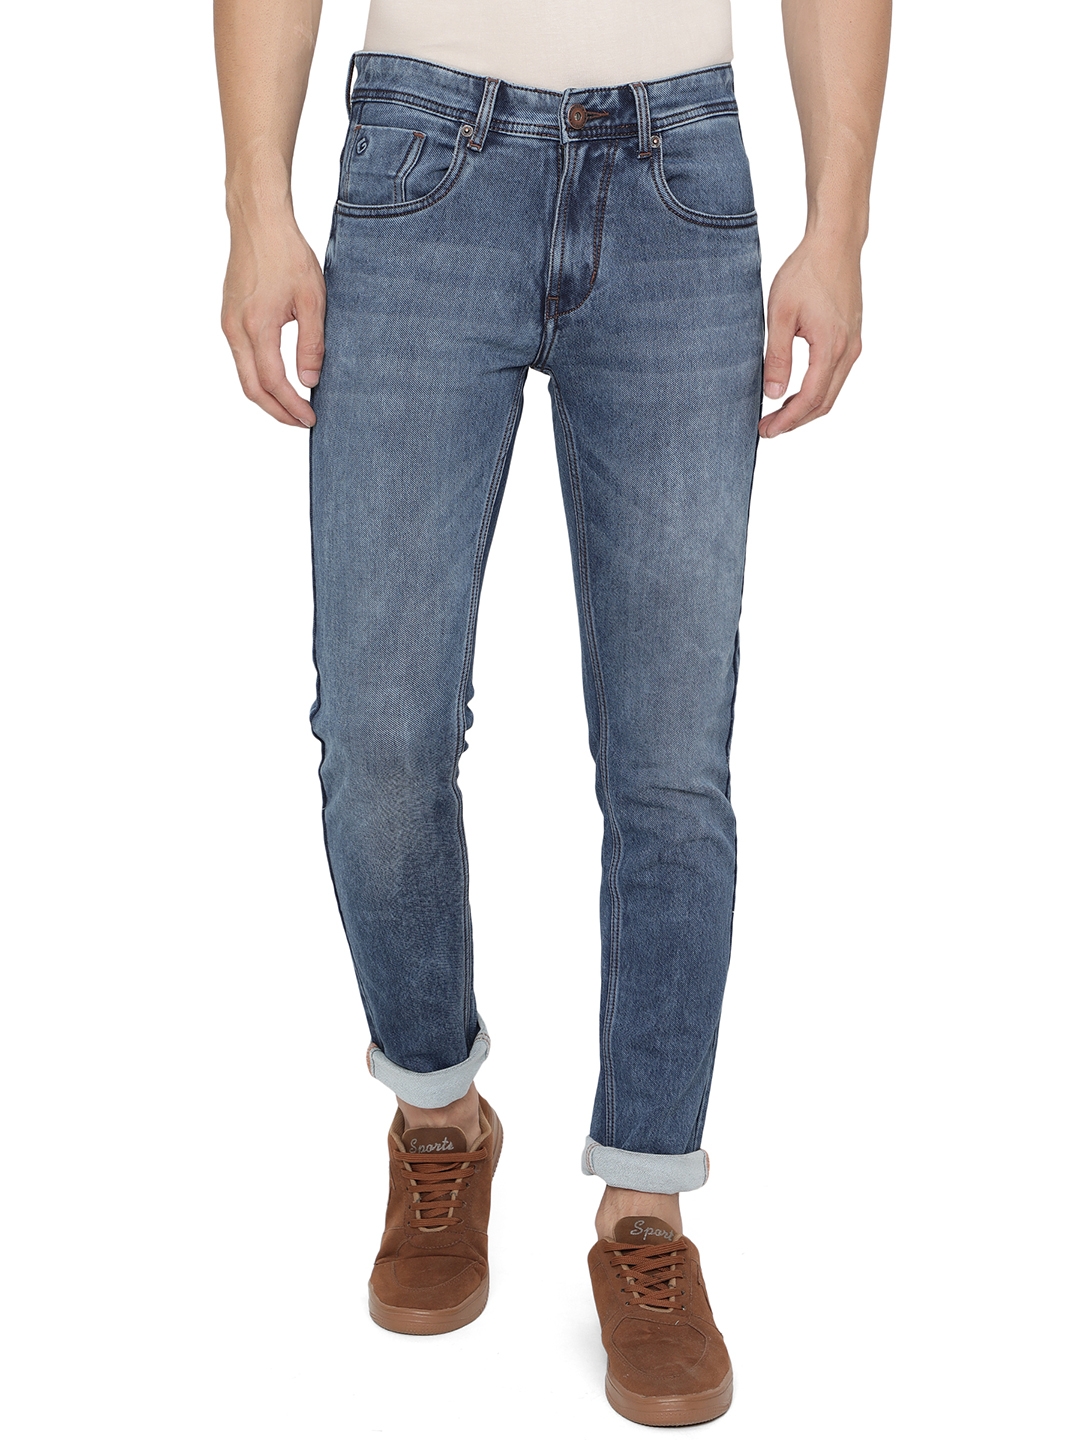 Ink Blue Washed Narrow Fit Jeans | Greenfibre